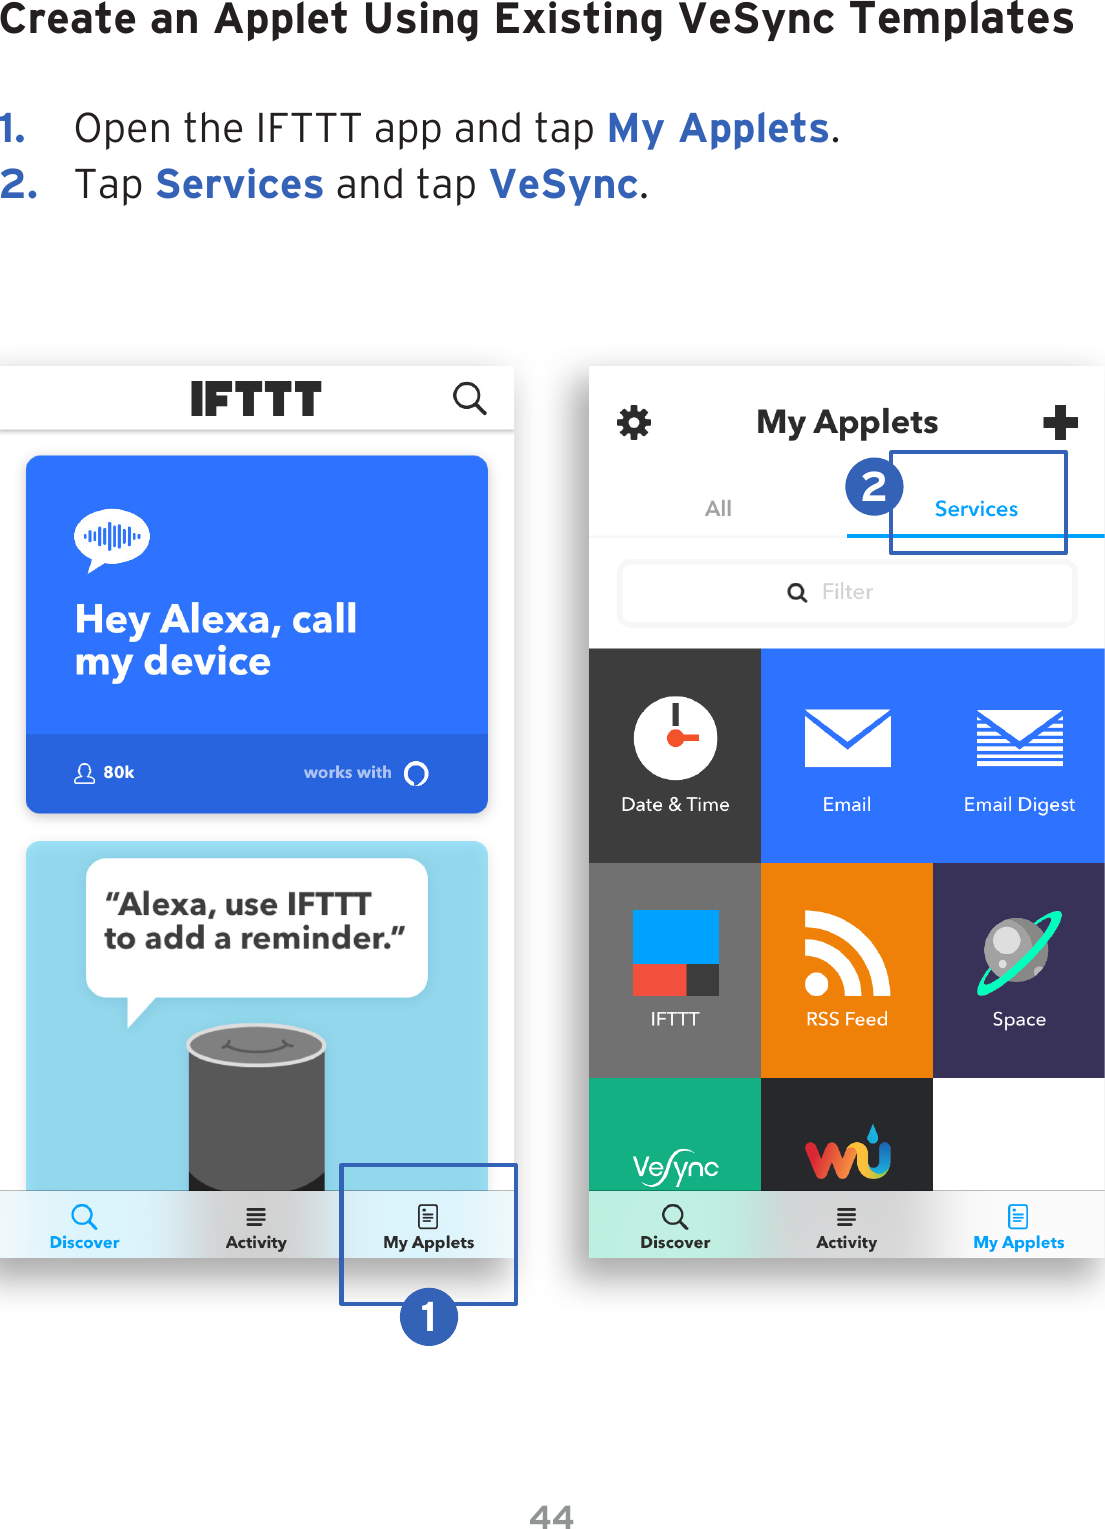 44Create an Applet Using Existing VeSync Templates1.  Open the IFTTT app and tap My Applets.2.  Tap Services and tap VeSync.12